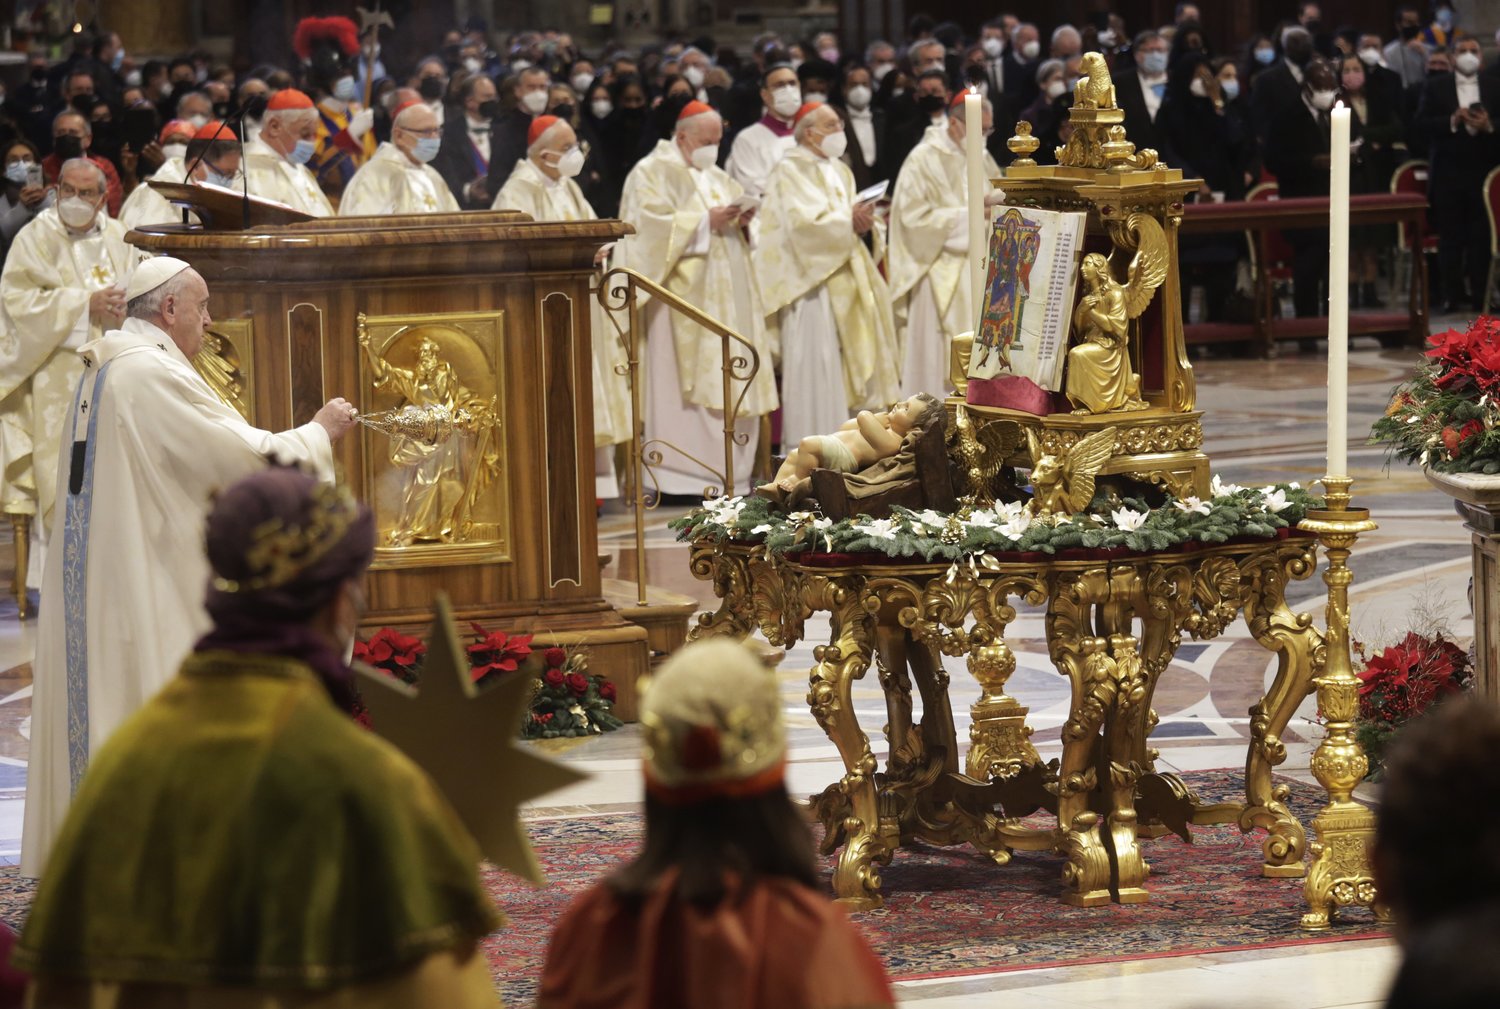 Pope Francis uses incense as he venerates a figurine of the Baby Jesus at the start of Mass marking the feast of Mary, Mother of God, in St. Peter’s Basilica at the Vatican Jan. 1. In the foreground are young people dressed as the Magi.